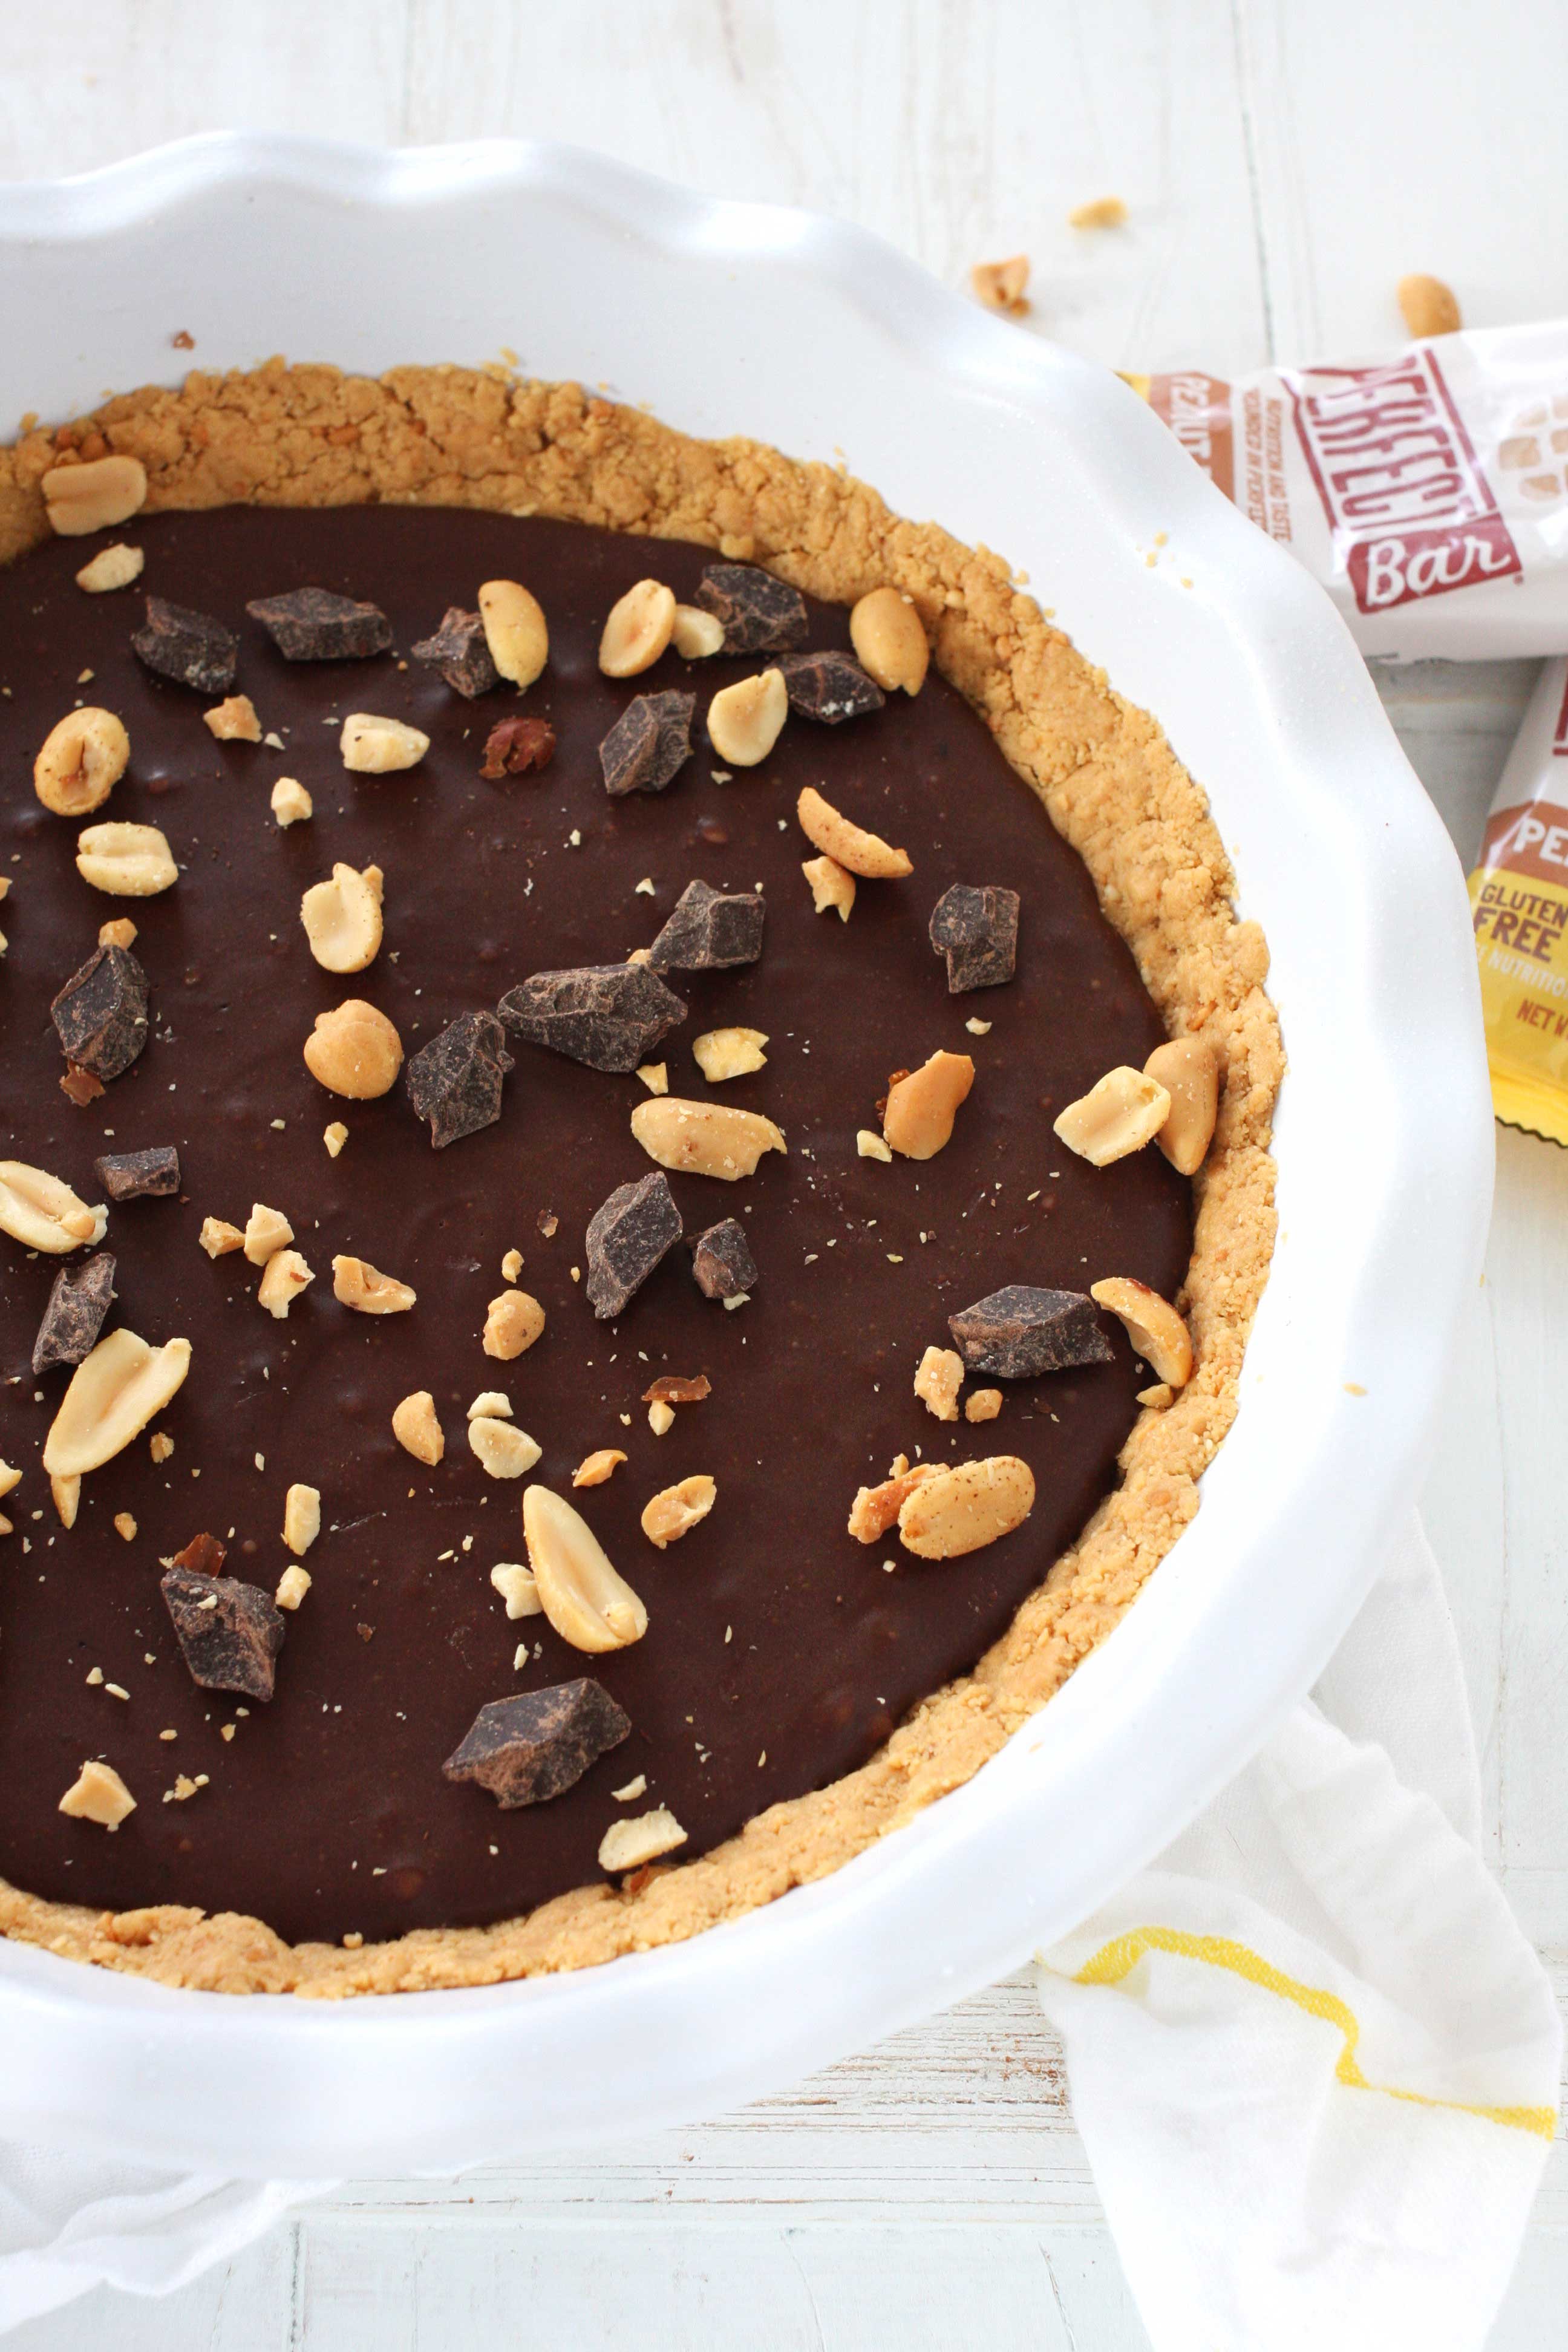 No Bake Chocolate Peanut Butter Pie // A delicious and mostly healthy no-bake chocolate peanut butter pie made with Perfect Bars for the crust and coconut cream for a rich filling #sponsored #chocolate #peanutbutter #nobake